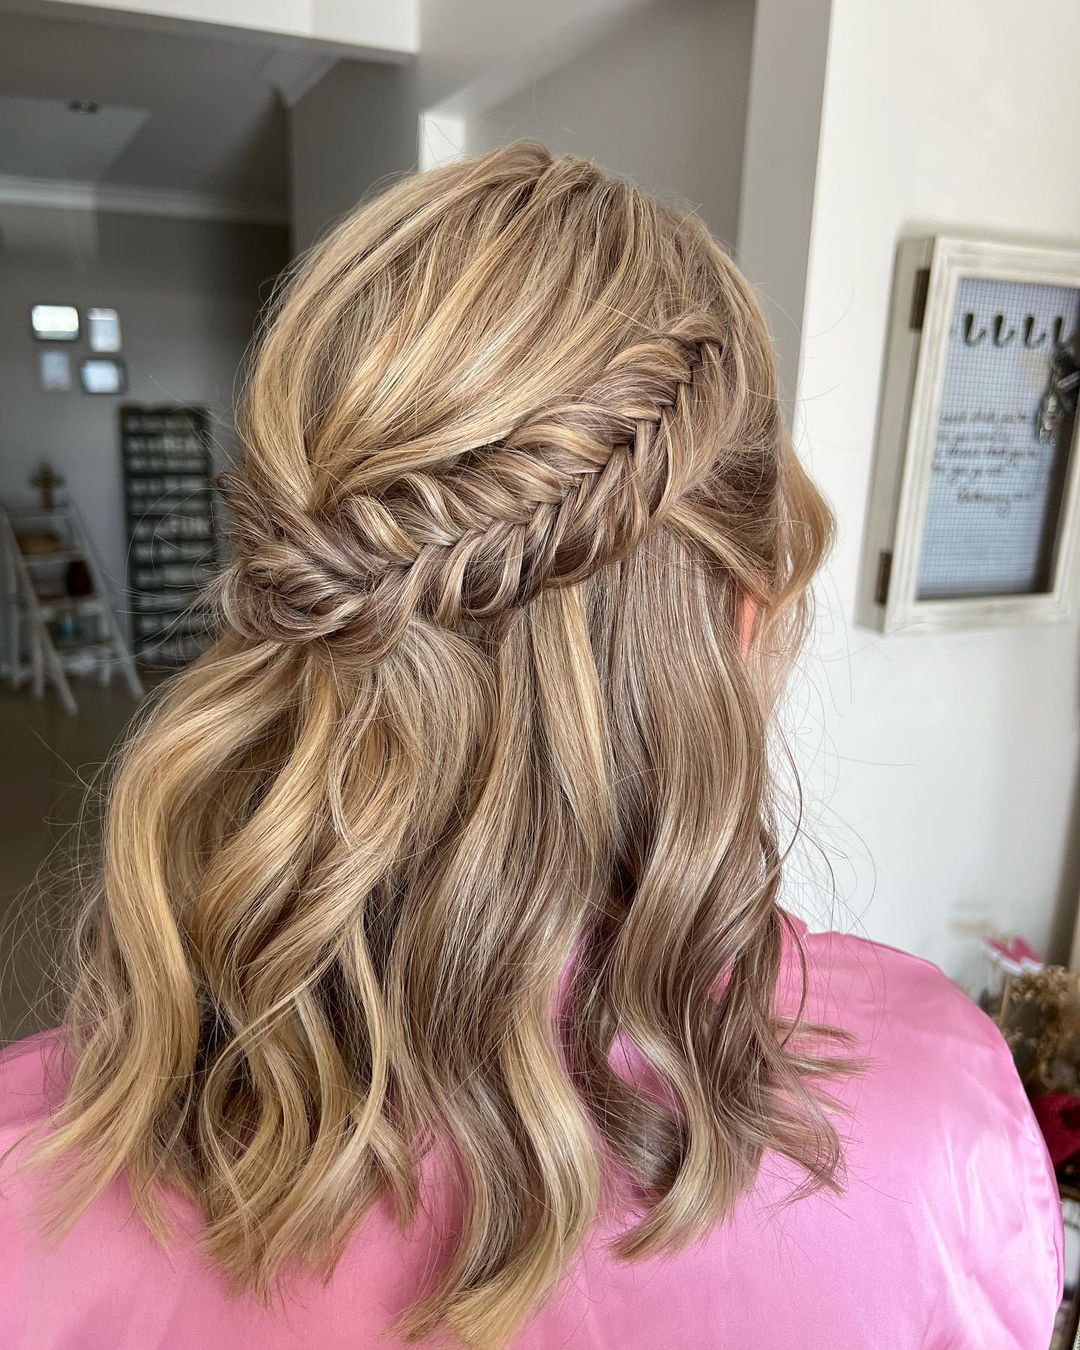 french braided flower corwn half up half down prom hairstyle for short hair via viahairbylaceygc